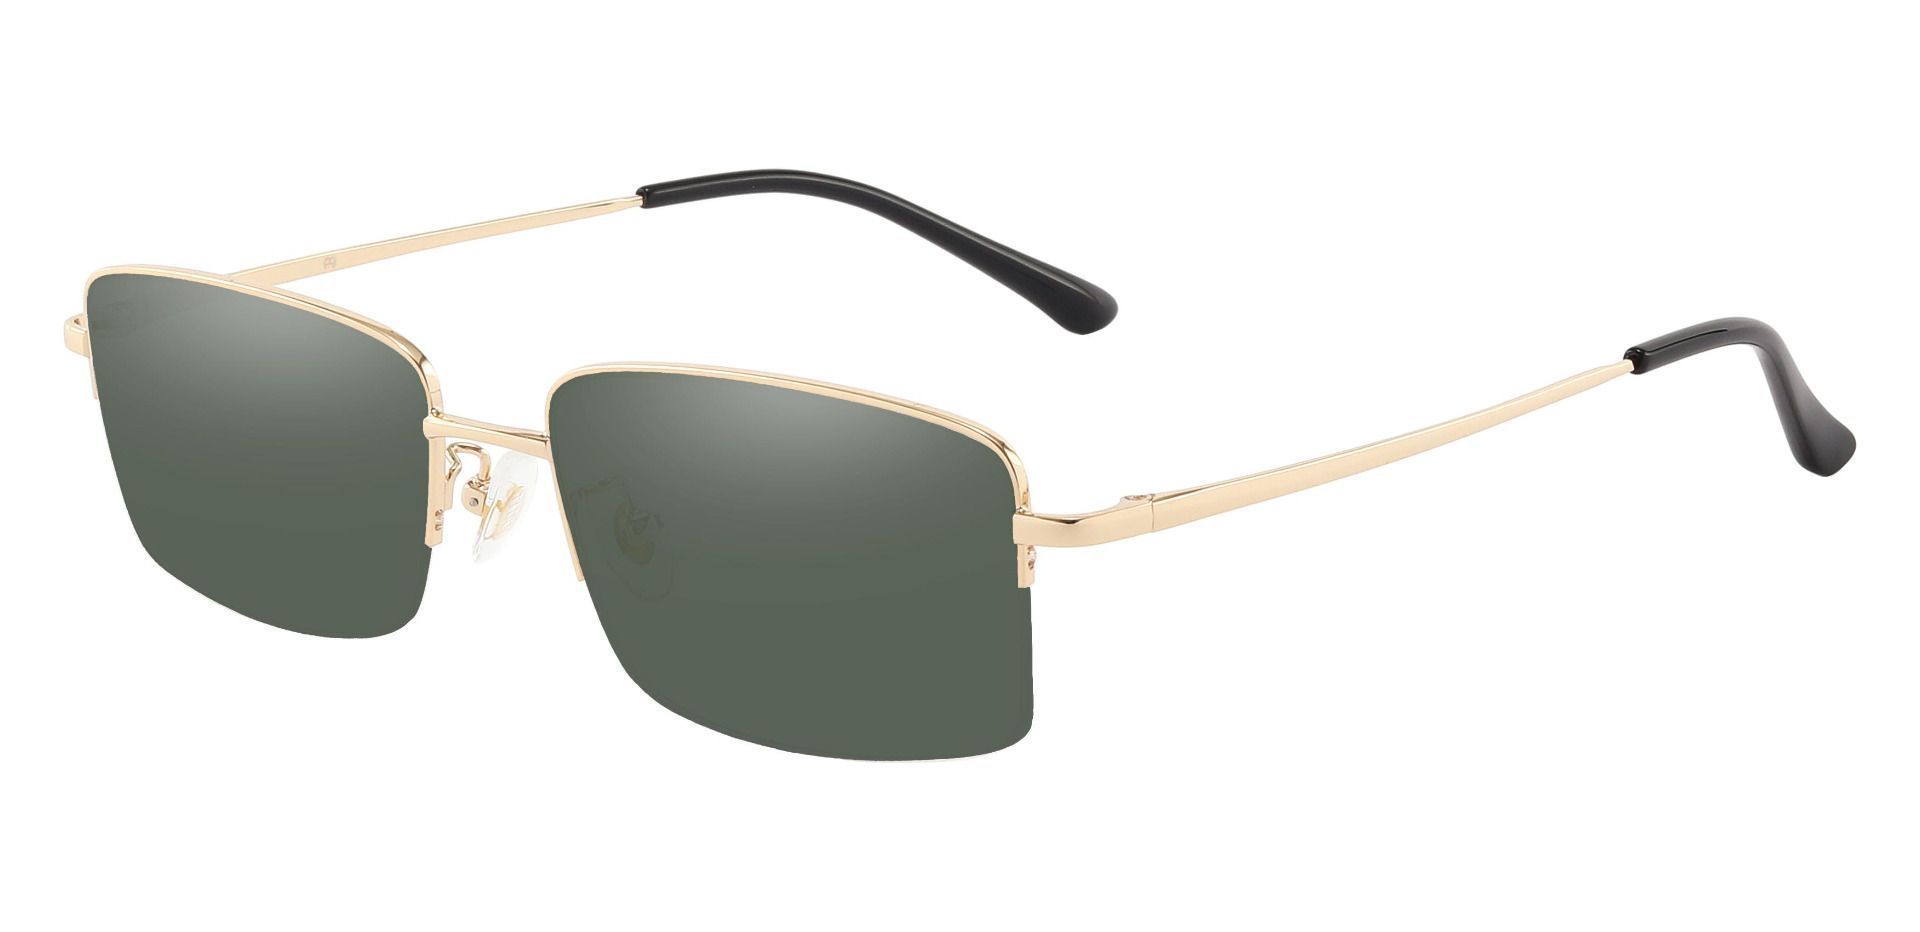 Bellmont Rectangle Non-Rx Sunglasses - Gold Frame With Green Lenses